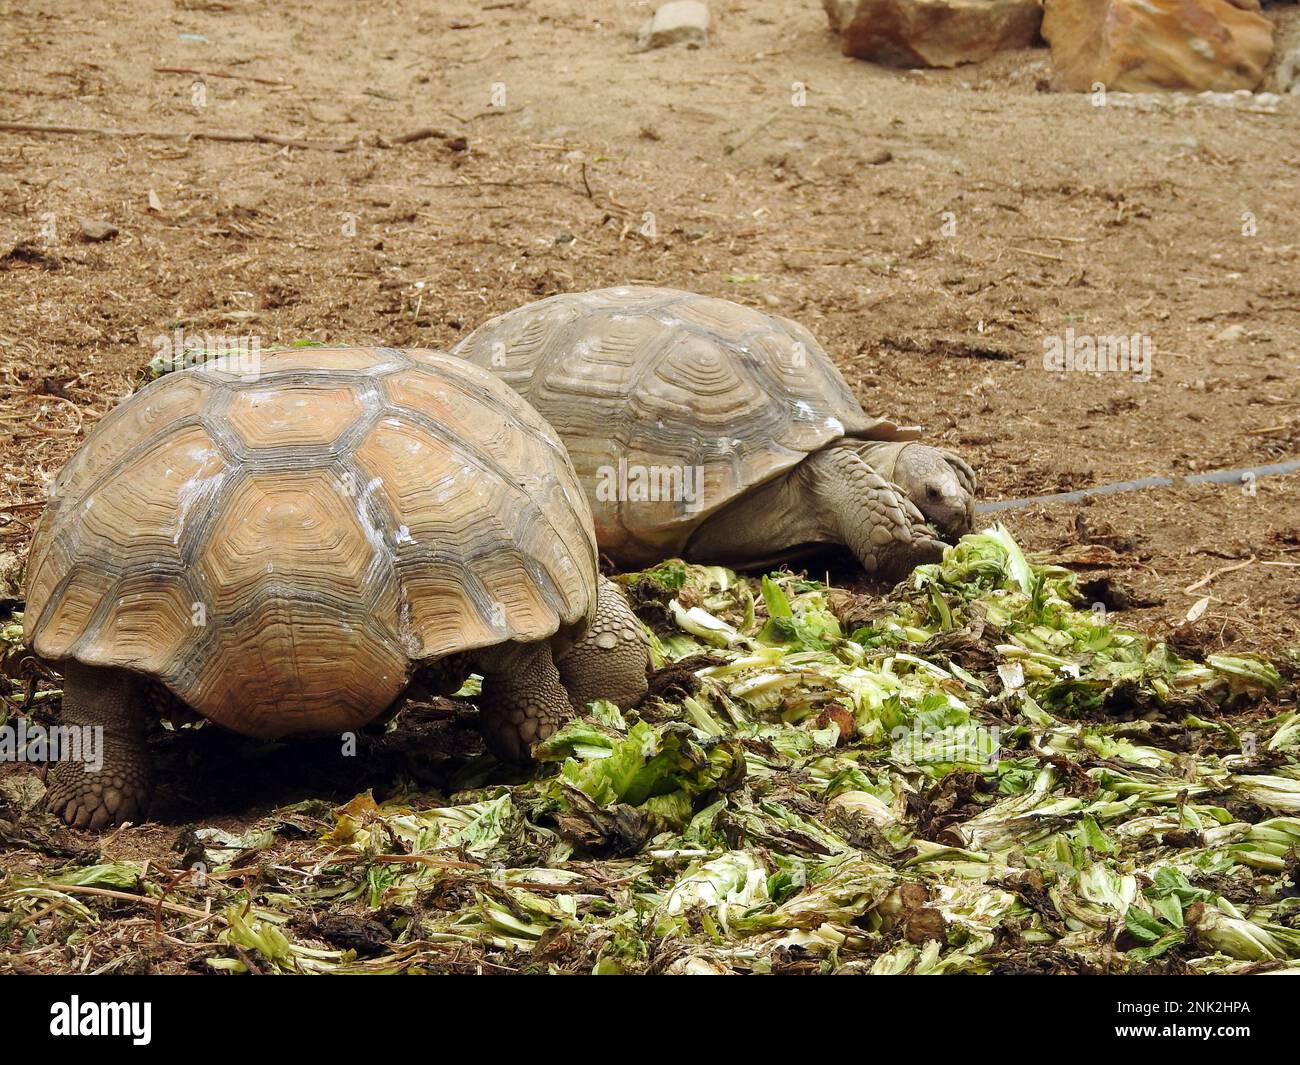 The Asian forest tortoise (Manouria emys), also known commonly as the Mountain tortoise, is a species of tortoise in the family Testudinidae, native i Stock Photo